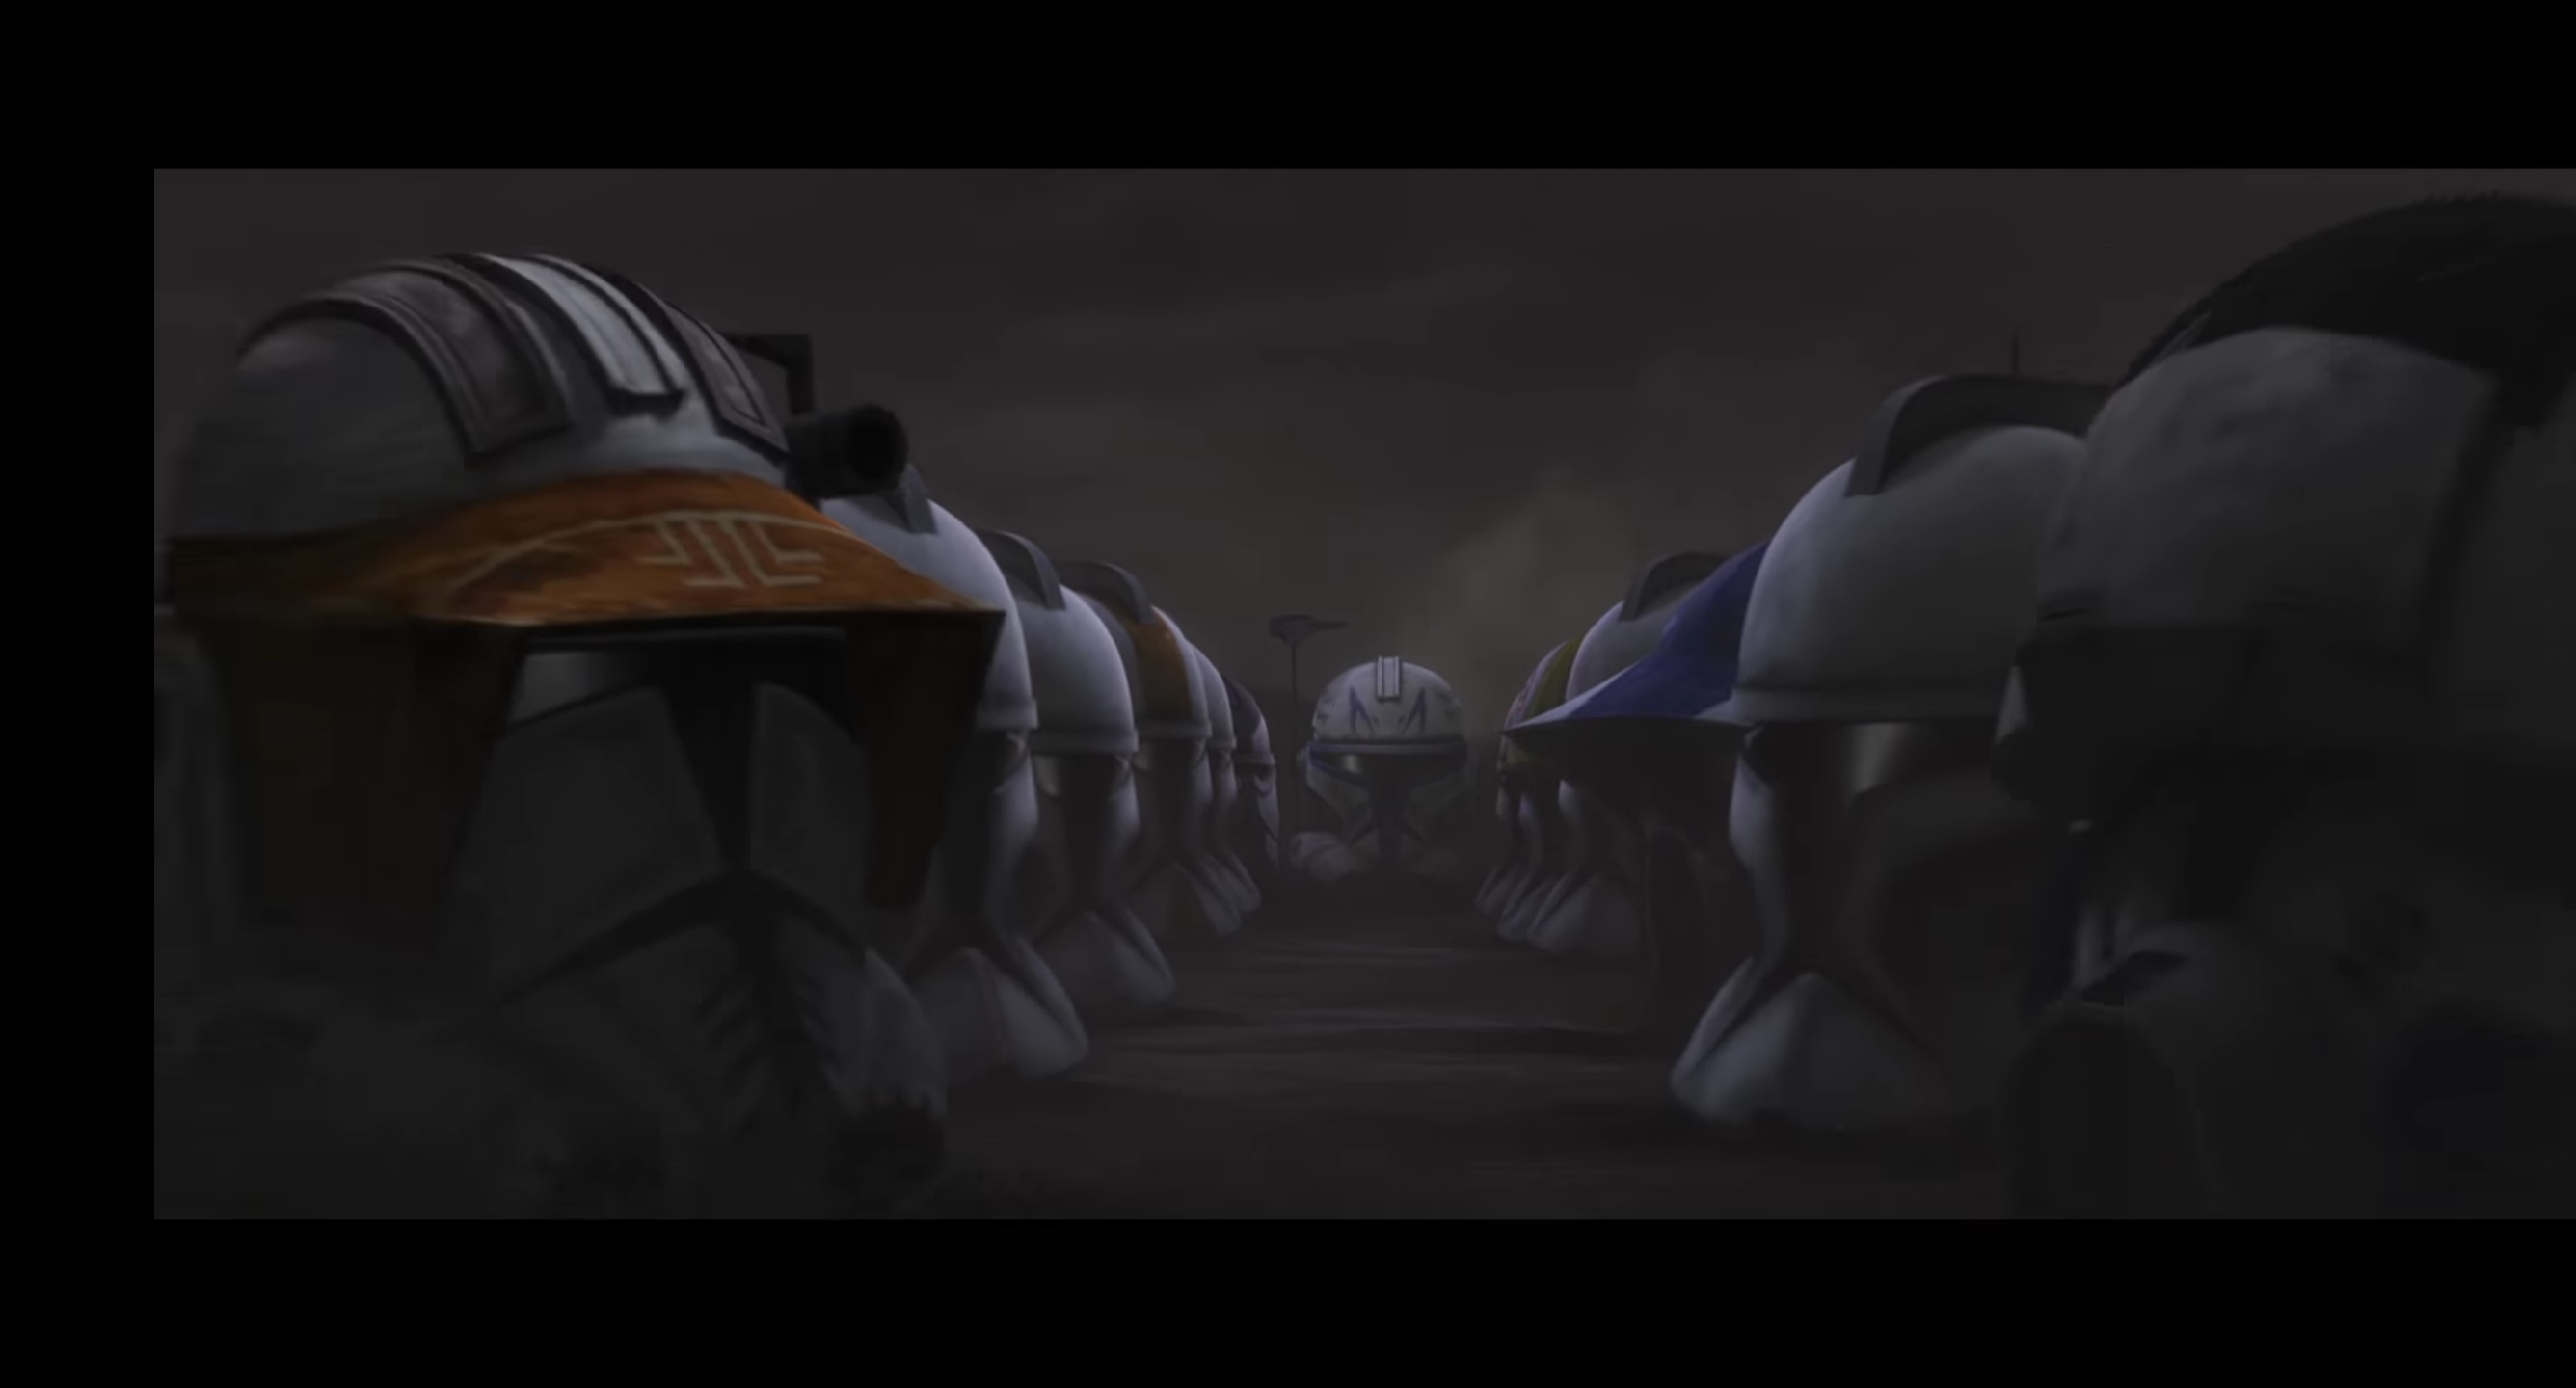 Can someone create a Wallpaper out of the Clone Wars Helmets (Rex, Cody, Fives, .) like in the new trailer?